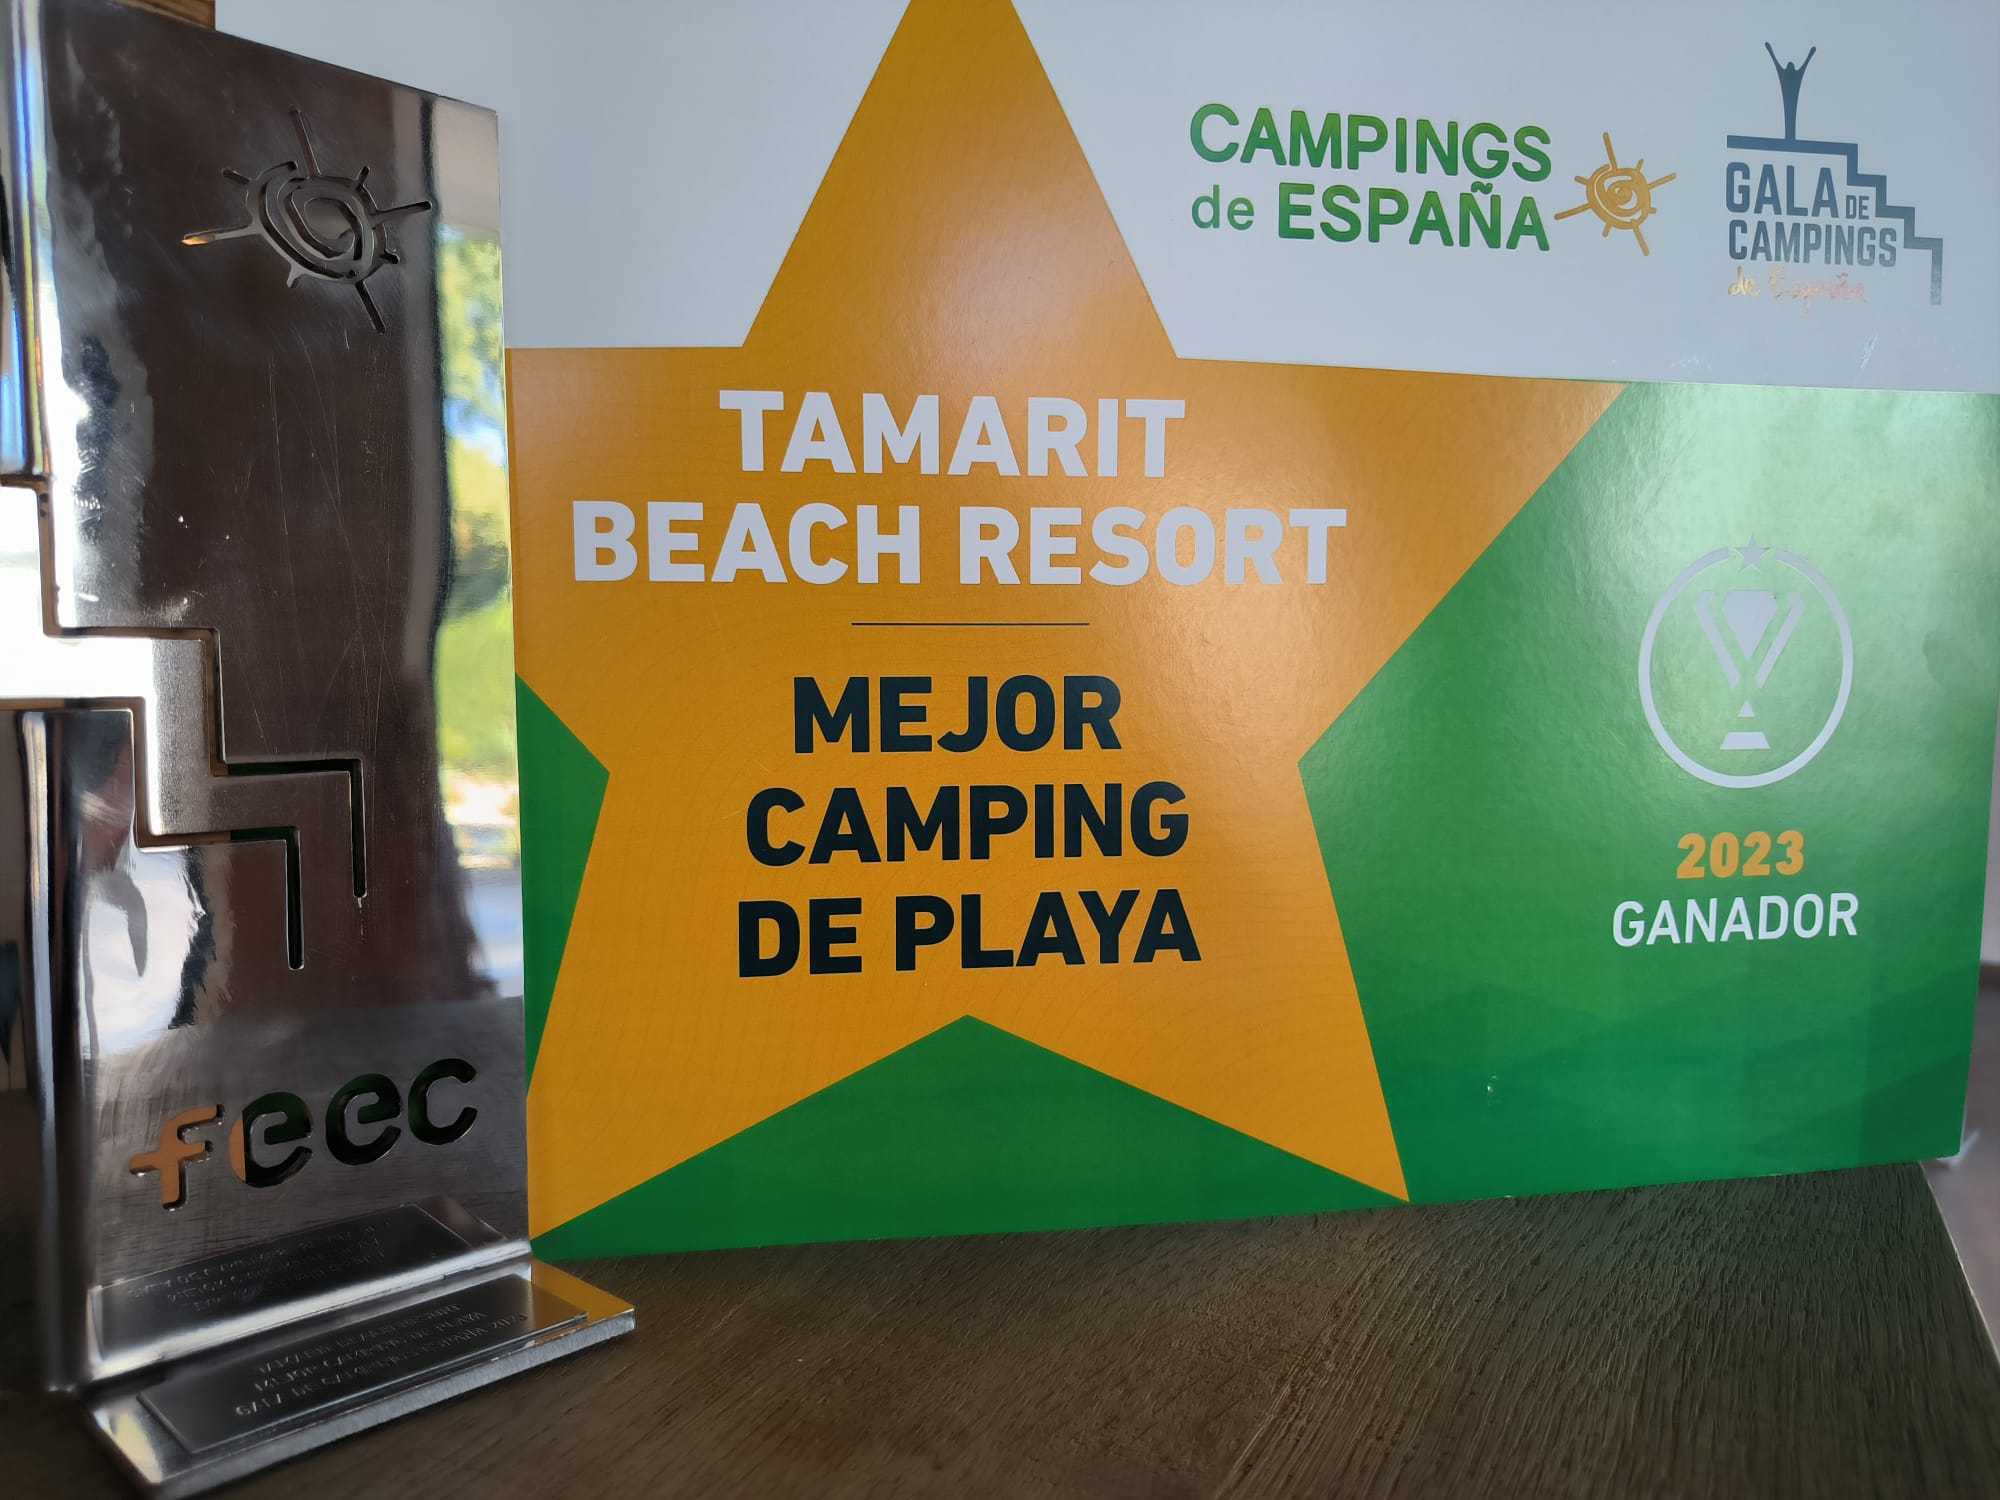 The FEEC awards us the title of Best Beach Campsite in Spain.